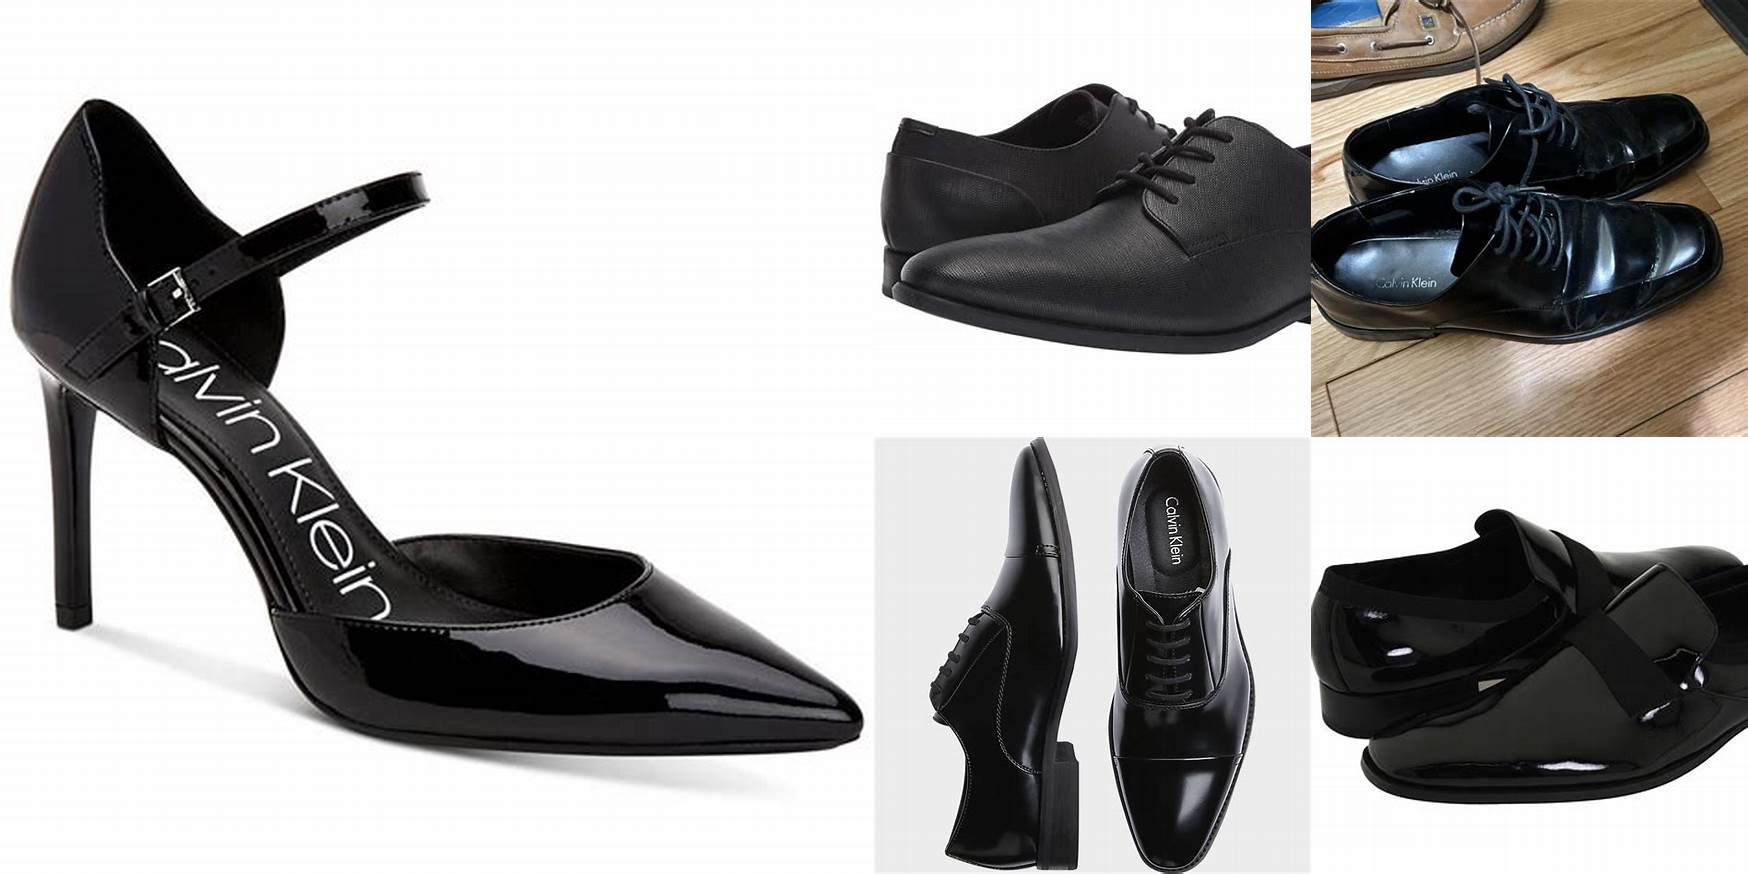 Calvin Klein Dress Shoes: Sleek And Sophisticated Footwear - theclutcher